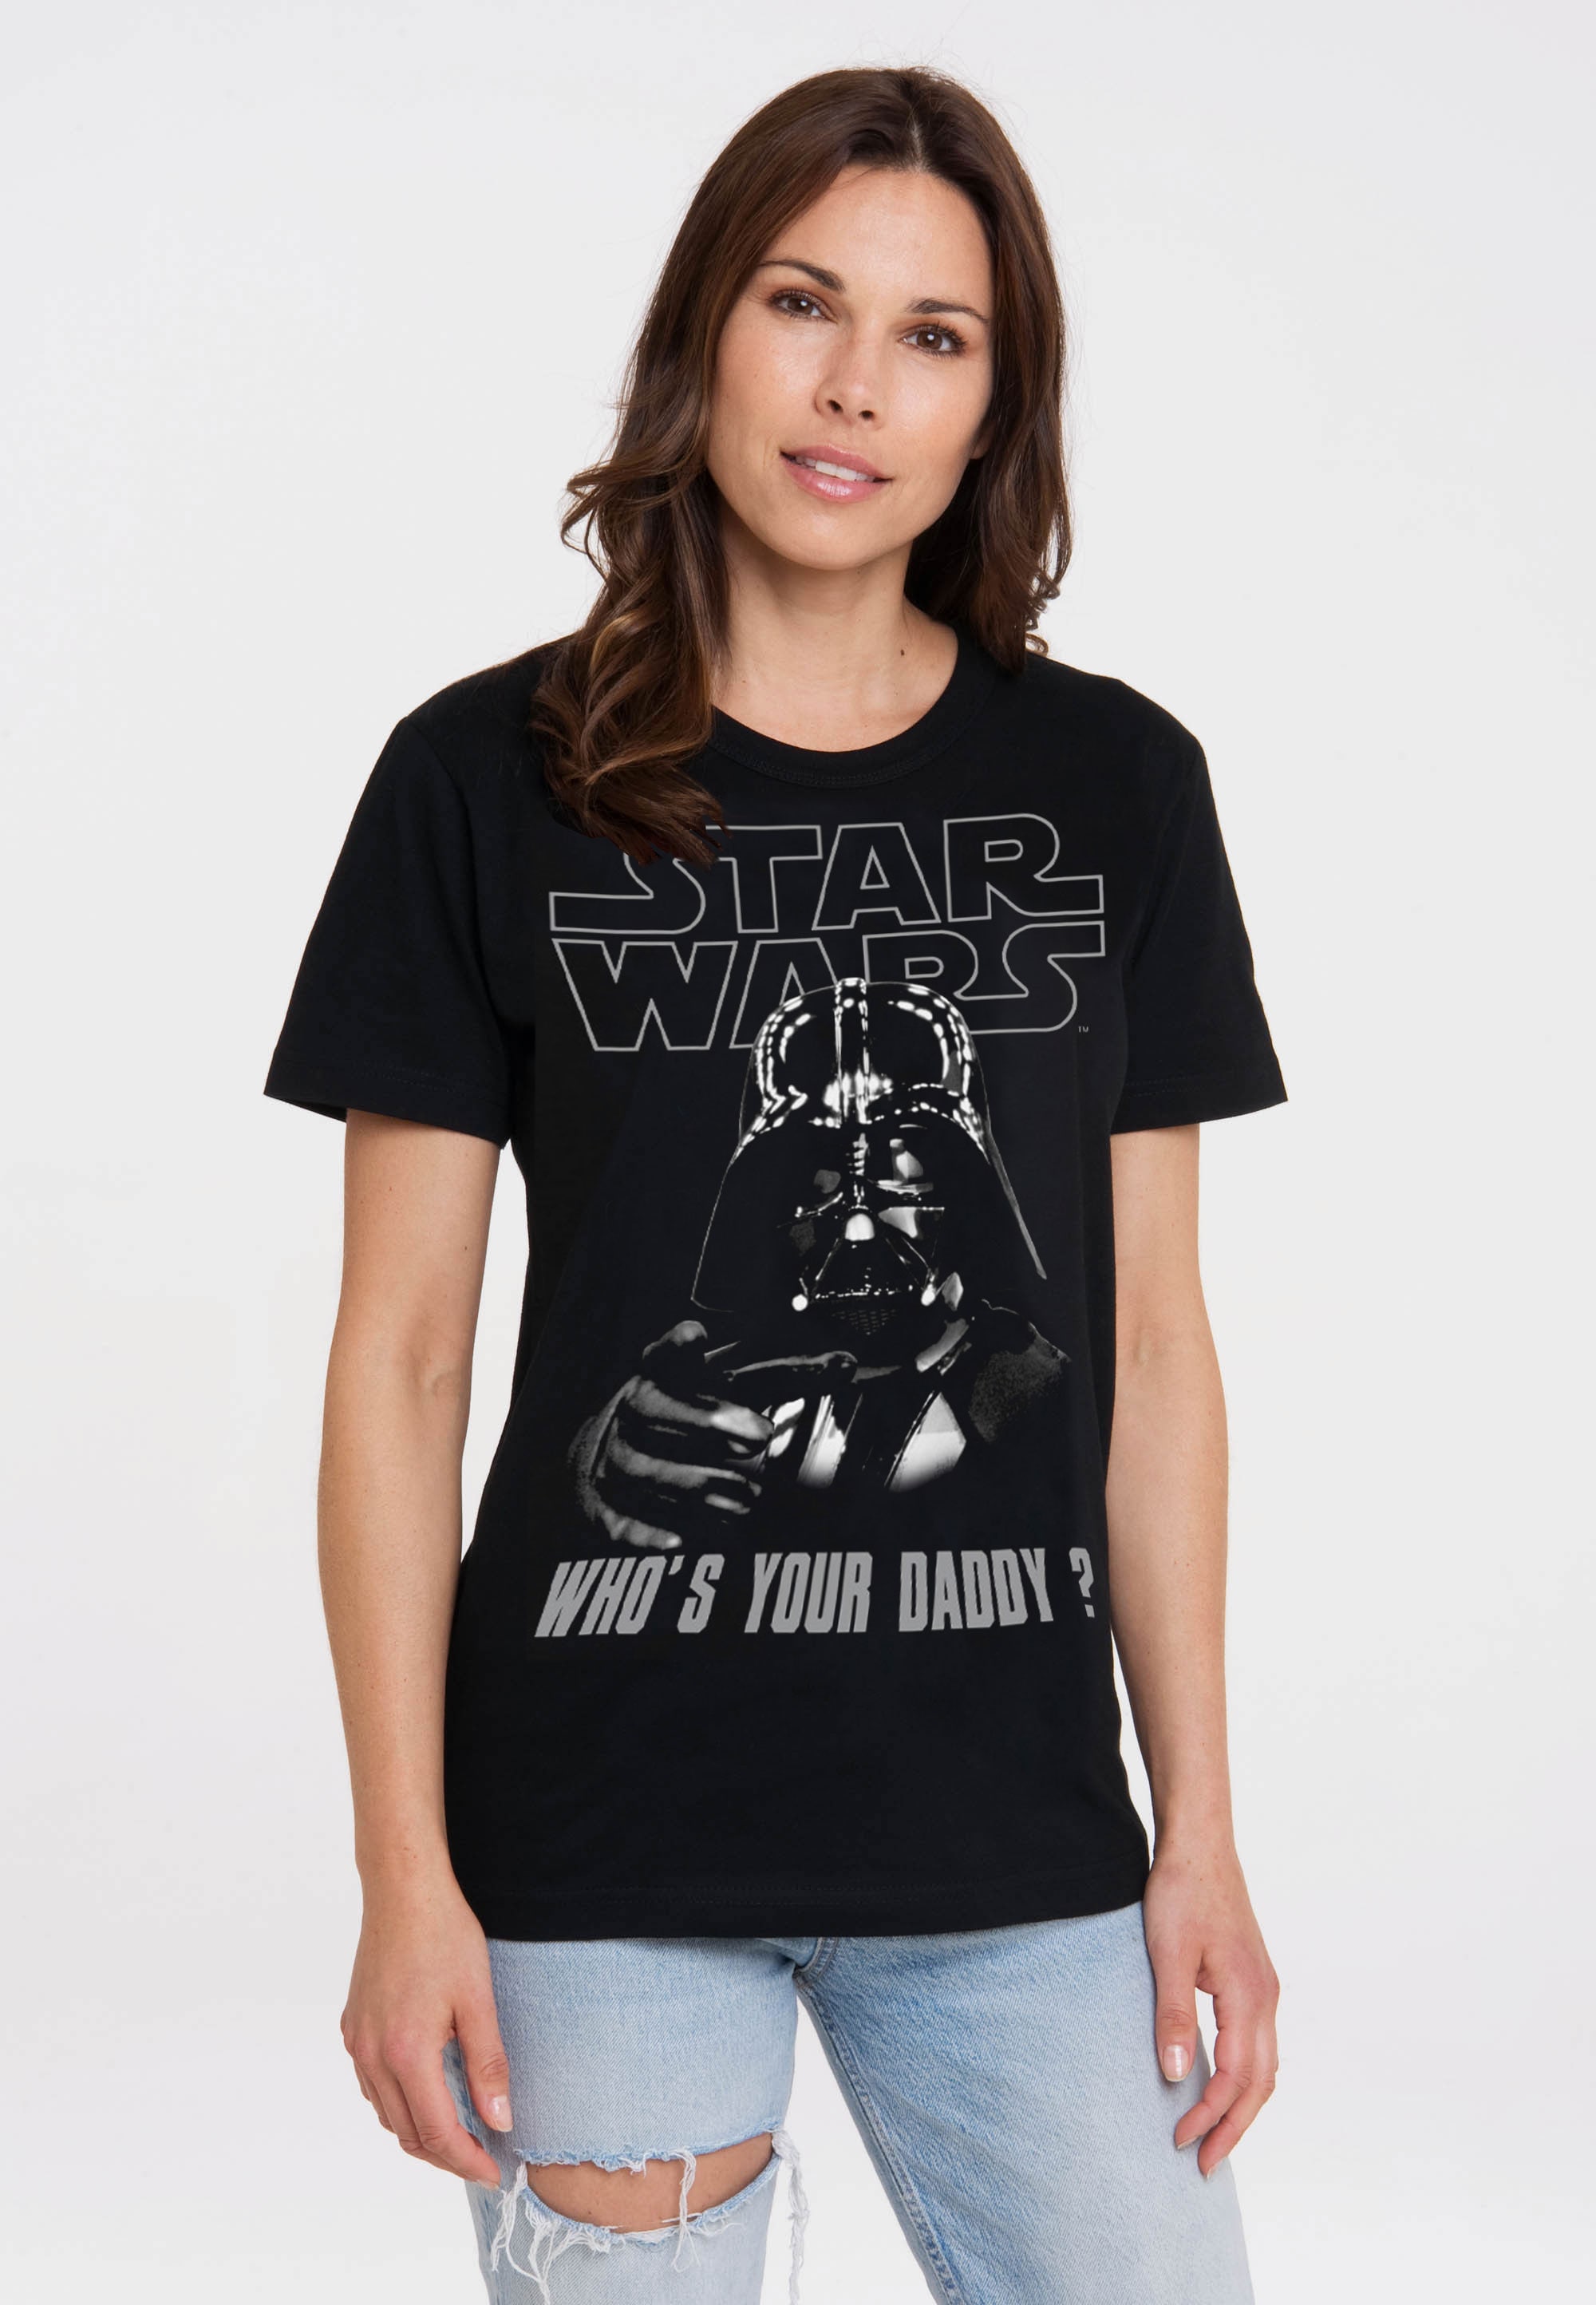 T-Shirt »Star Wars - Whos Your Daddy«, mit coolem Print